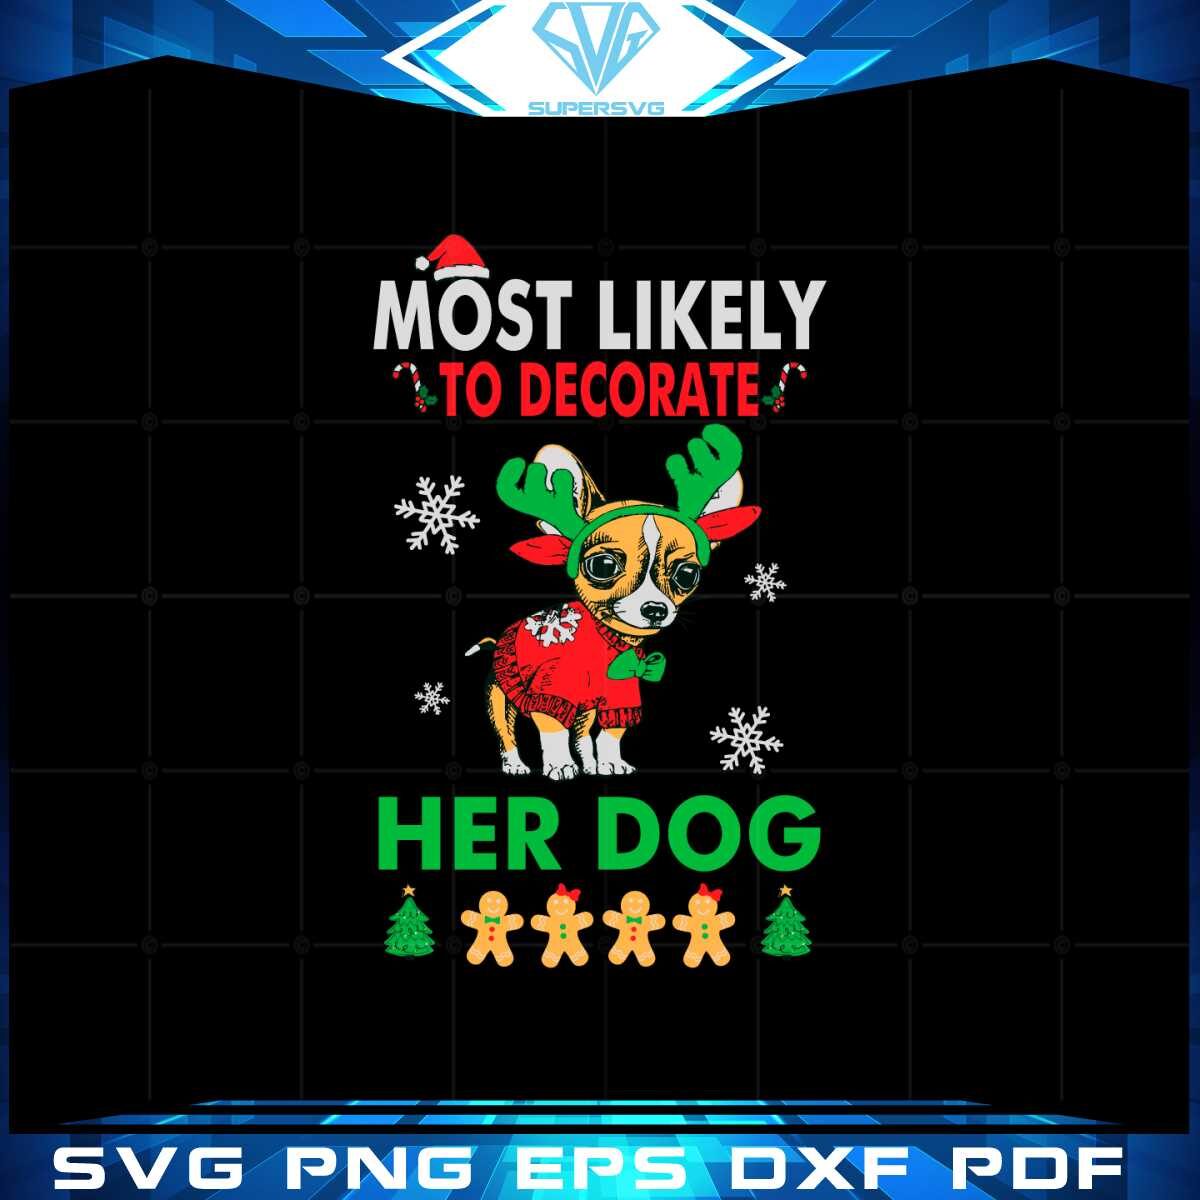 most-likely-to-decorate-the-dog-svg-graphic-designs-files